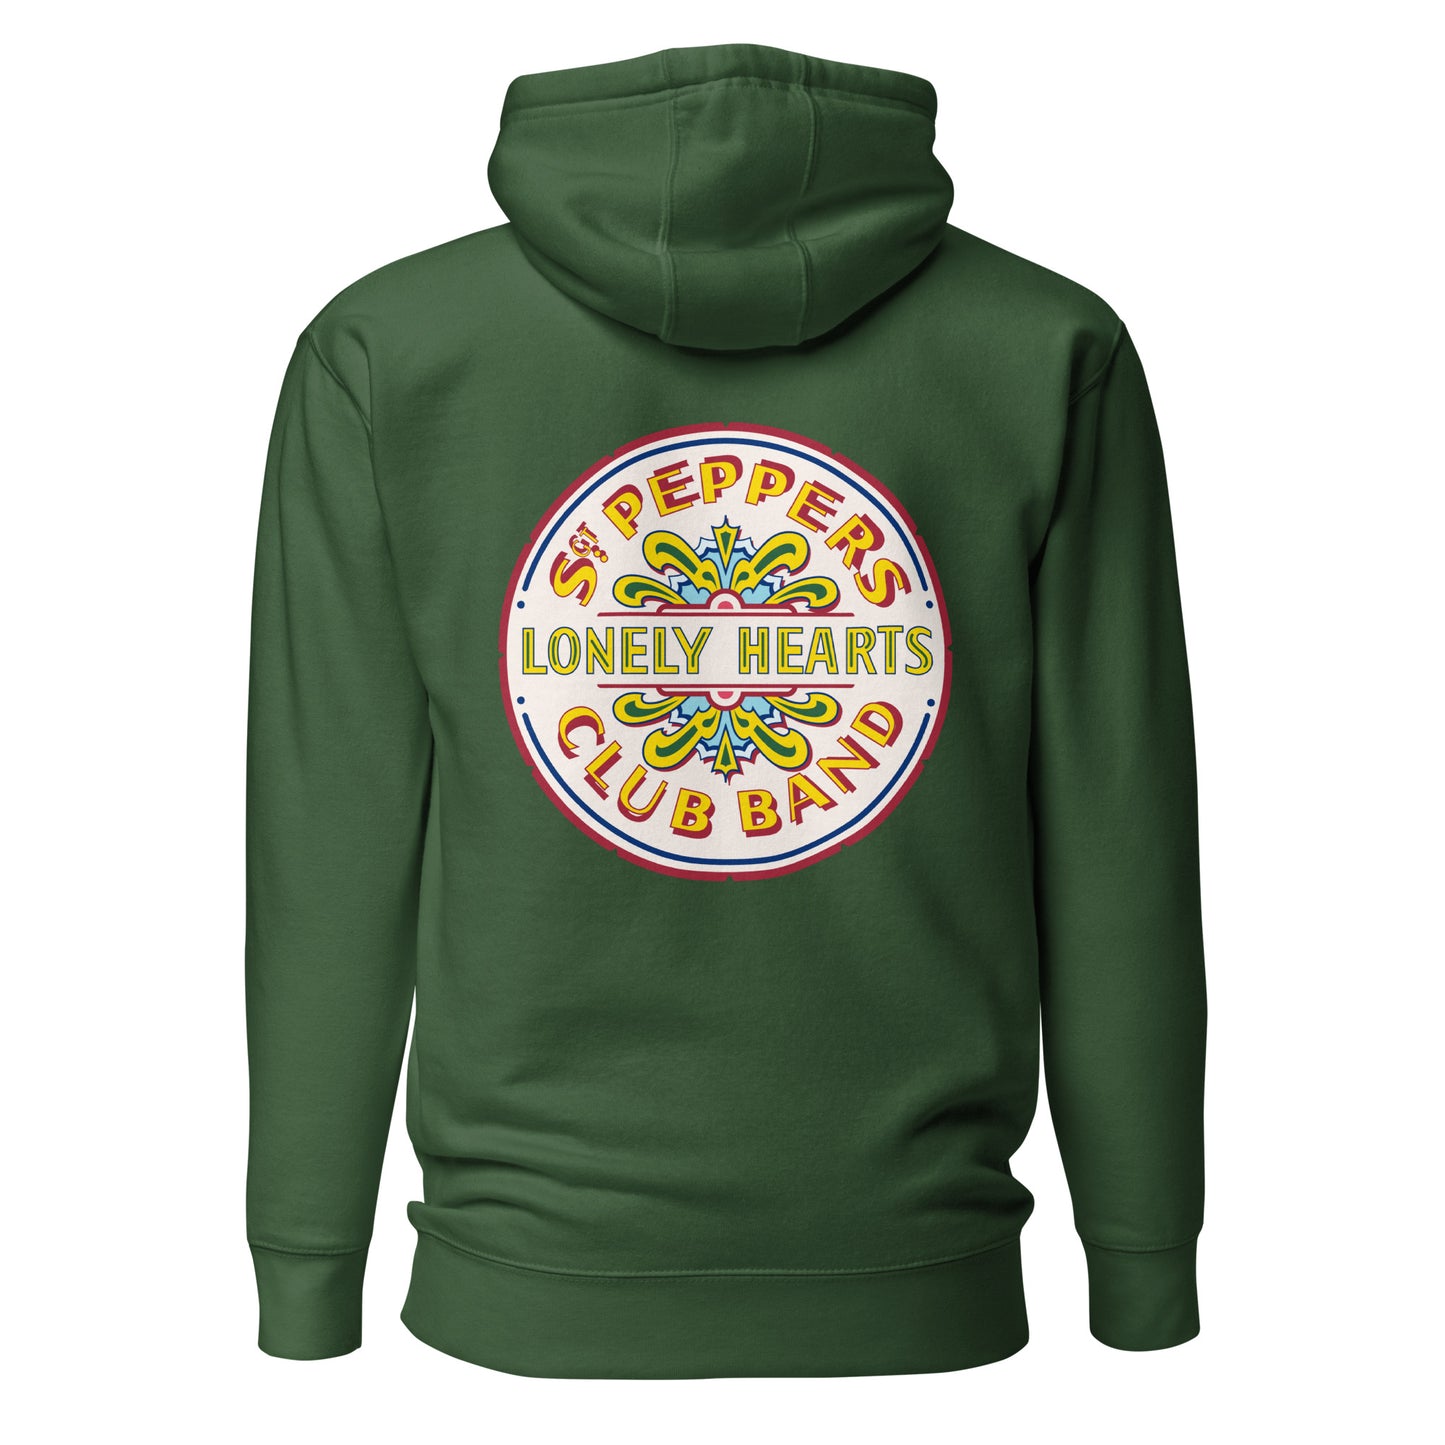 The Beatles Sgt. Pepper's Lonely Hearts Club Band Mix Hooded Fleece